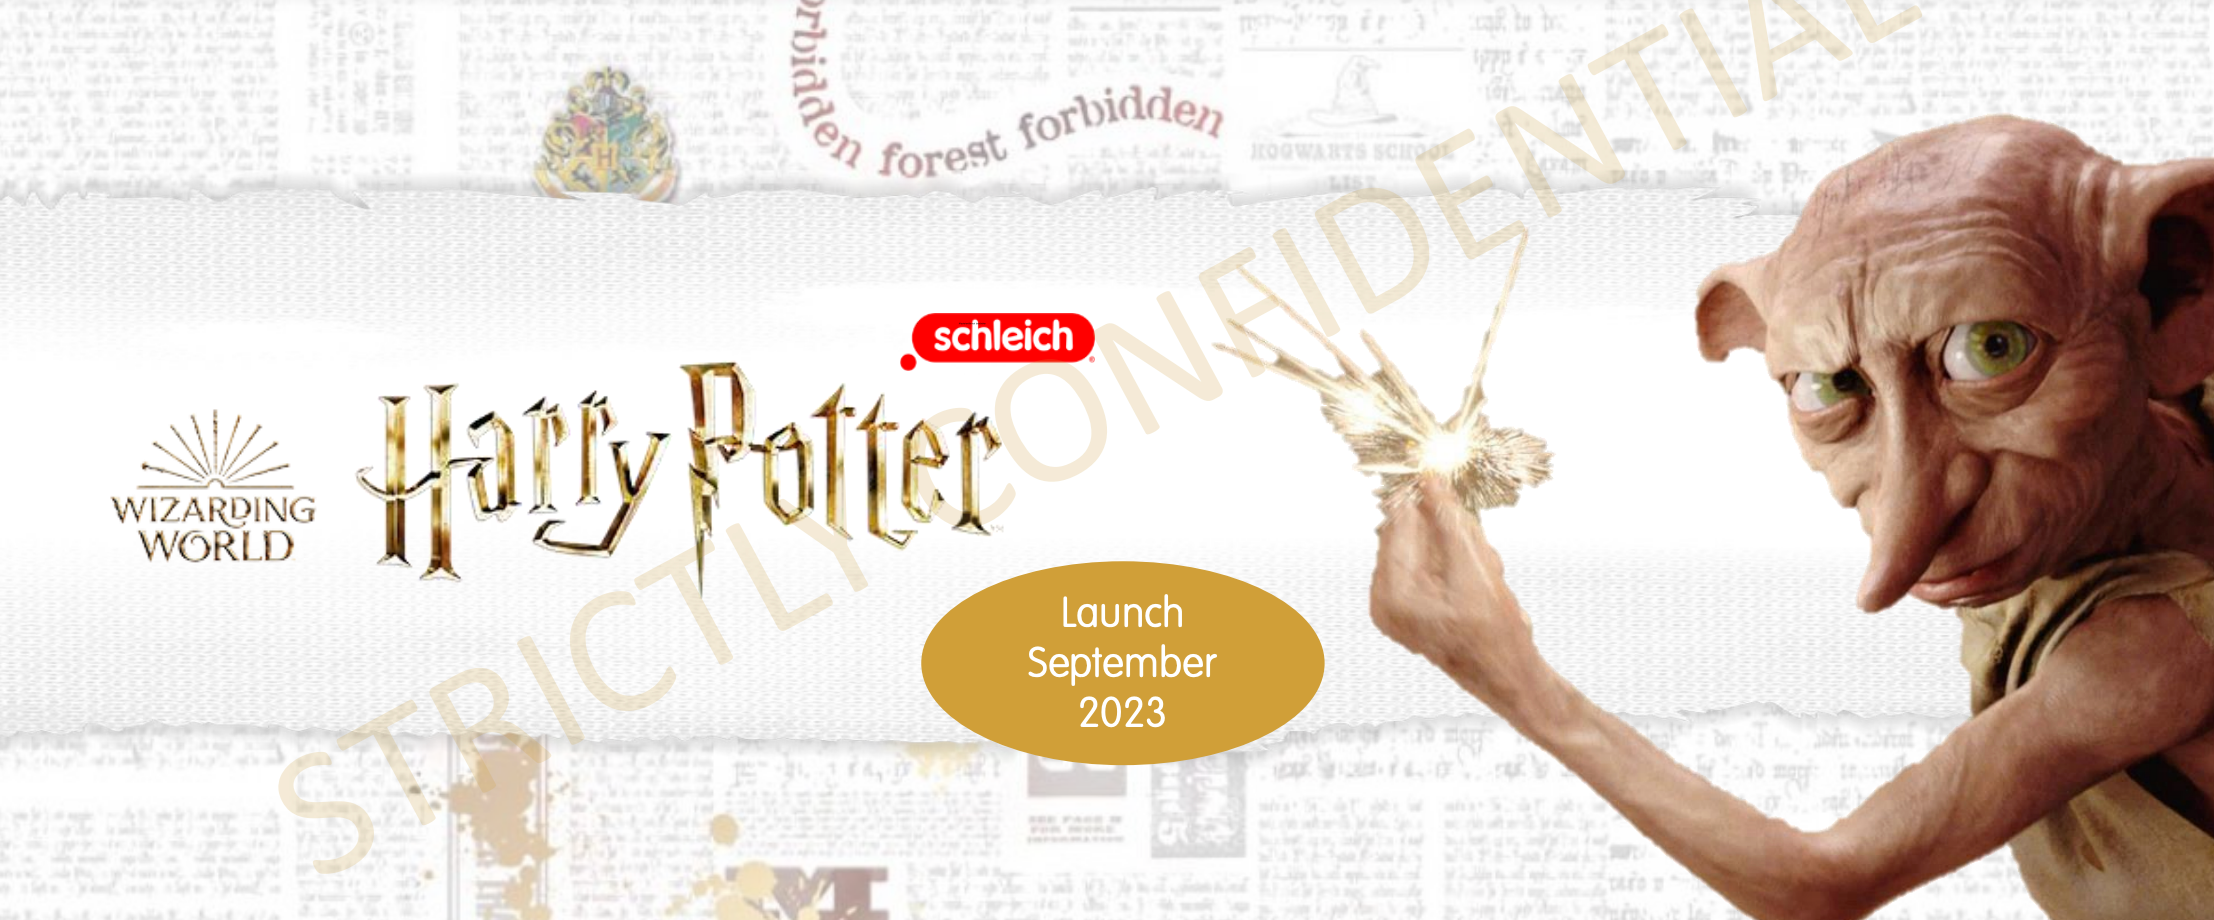 Schleich Launches New Harry Potter Wizarding World Line